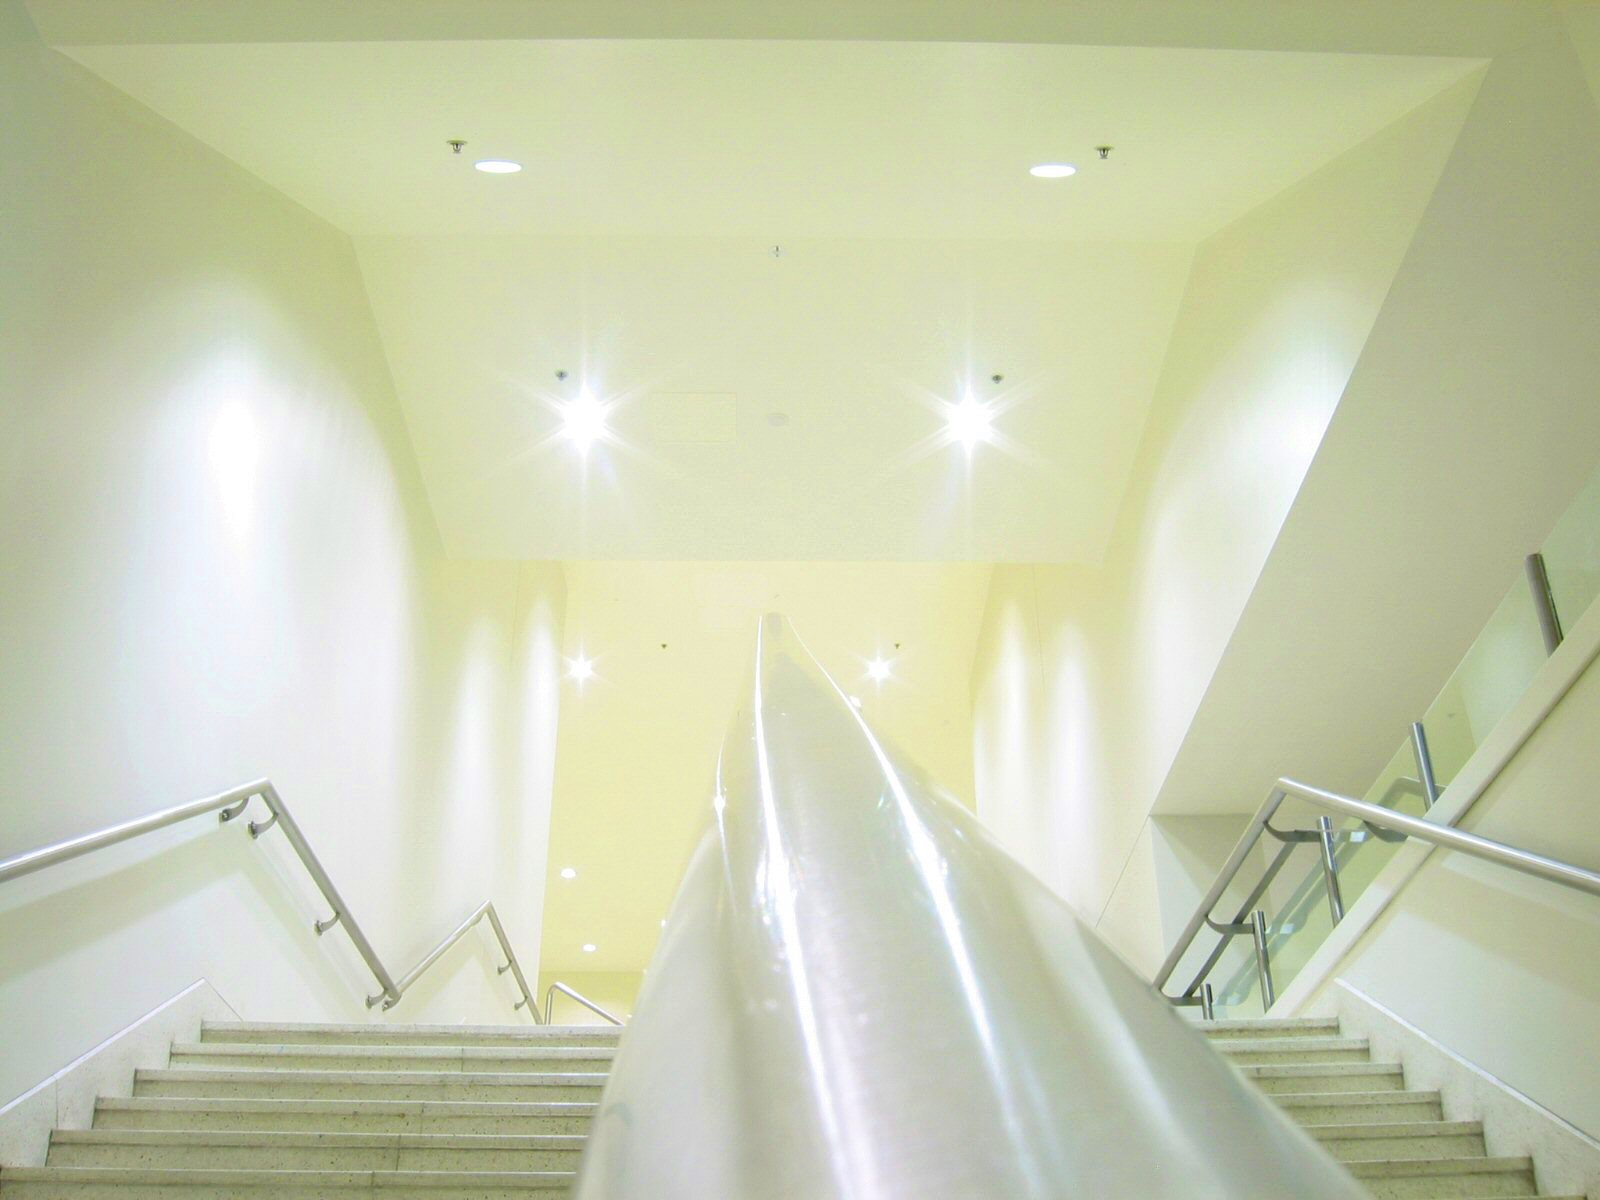 the bottom view of the stairwell with steps and escalator